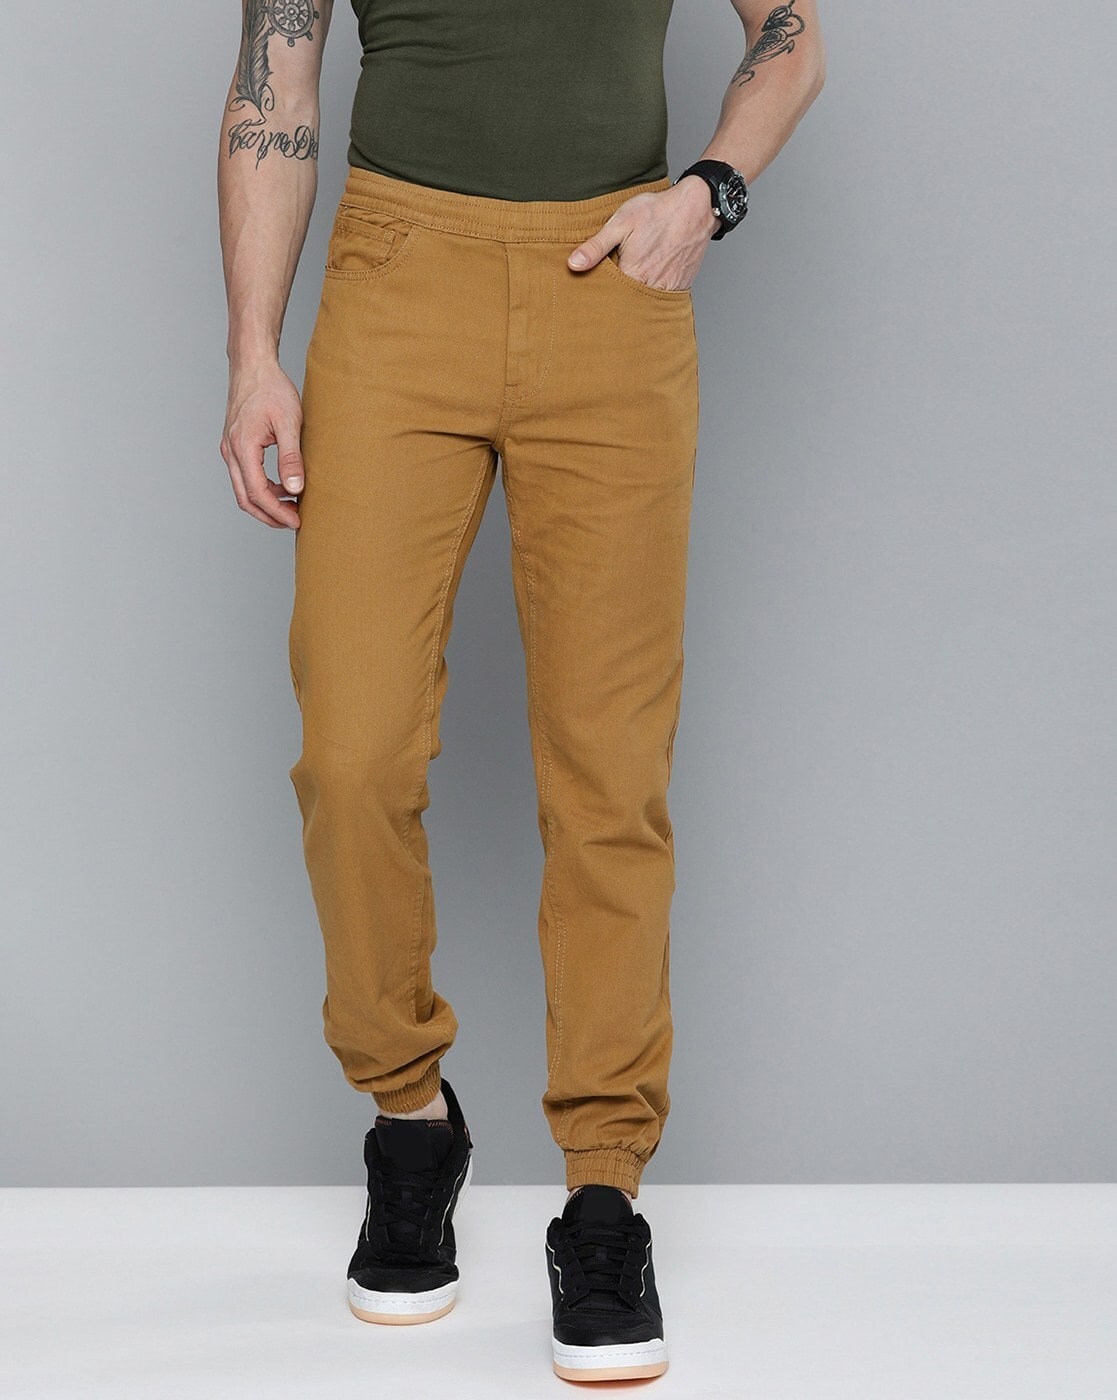 Buy tbase Mens Whiskey Solid Cargo Pants for Men Online India